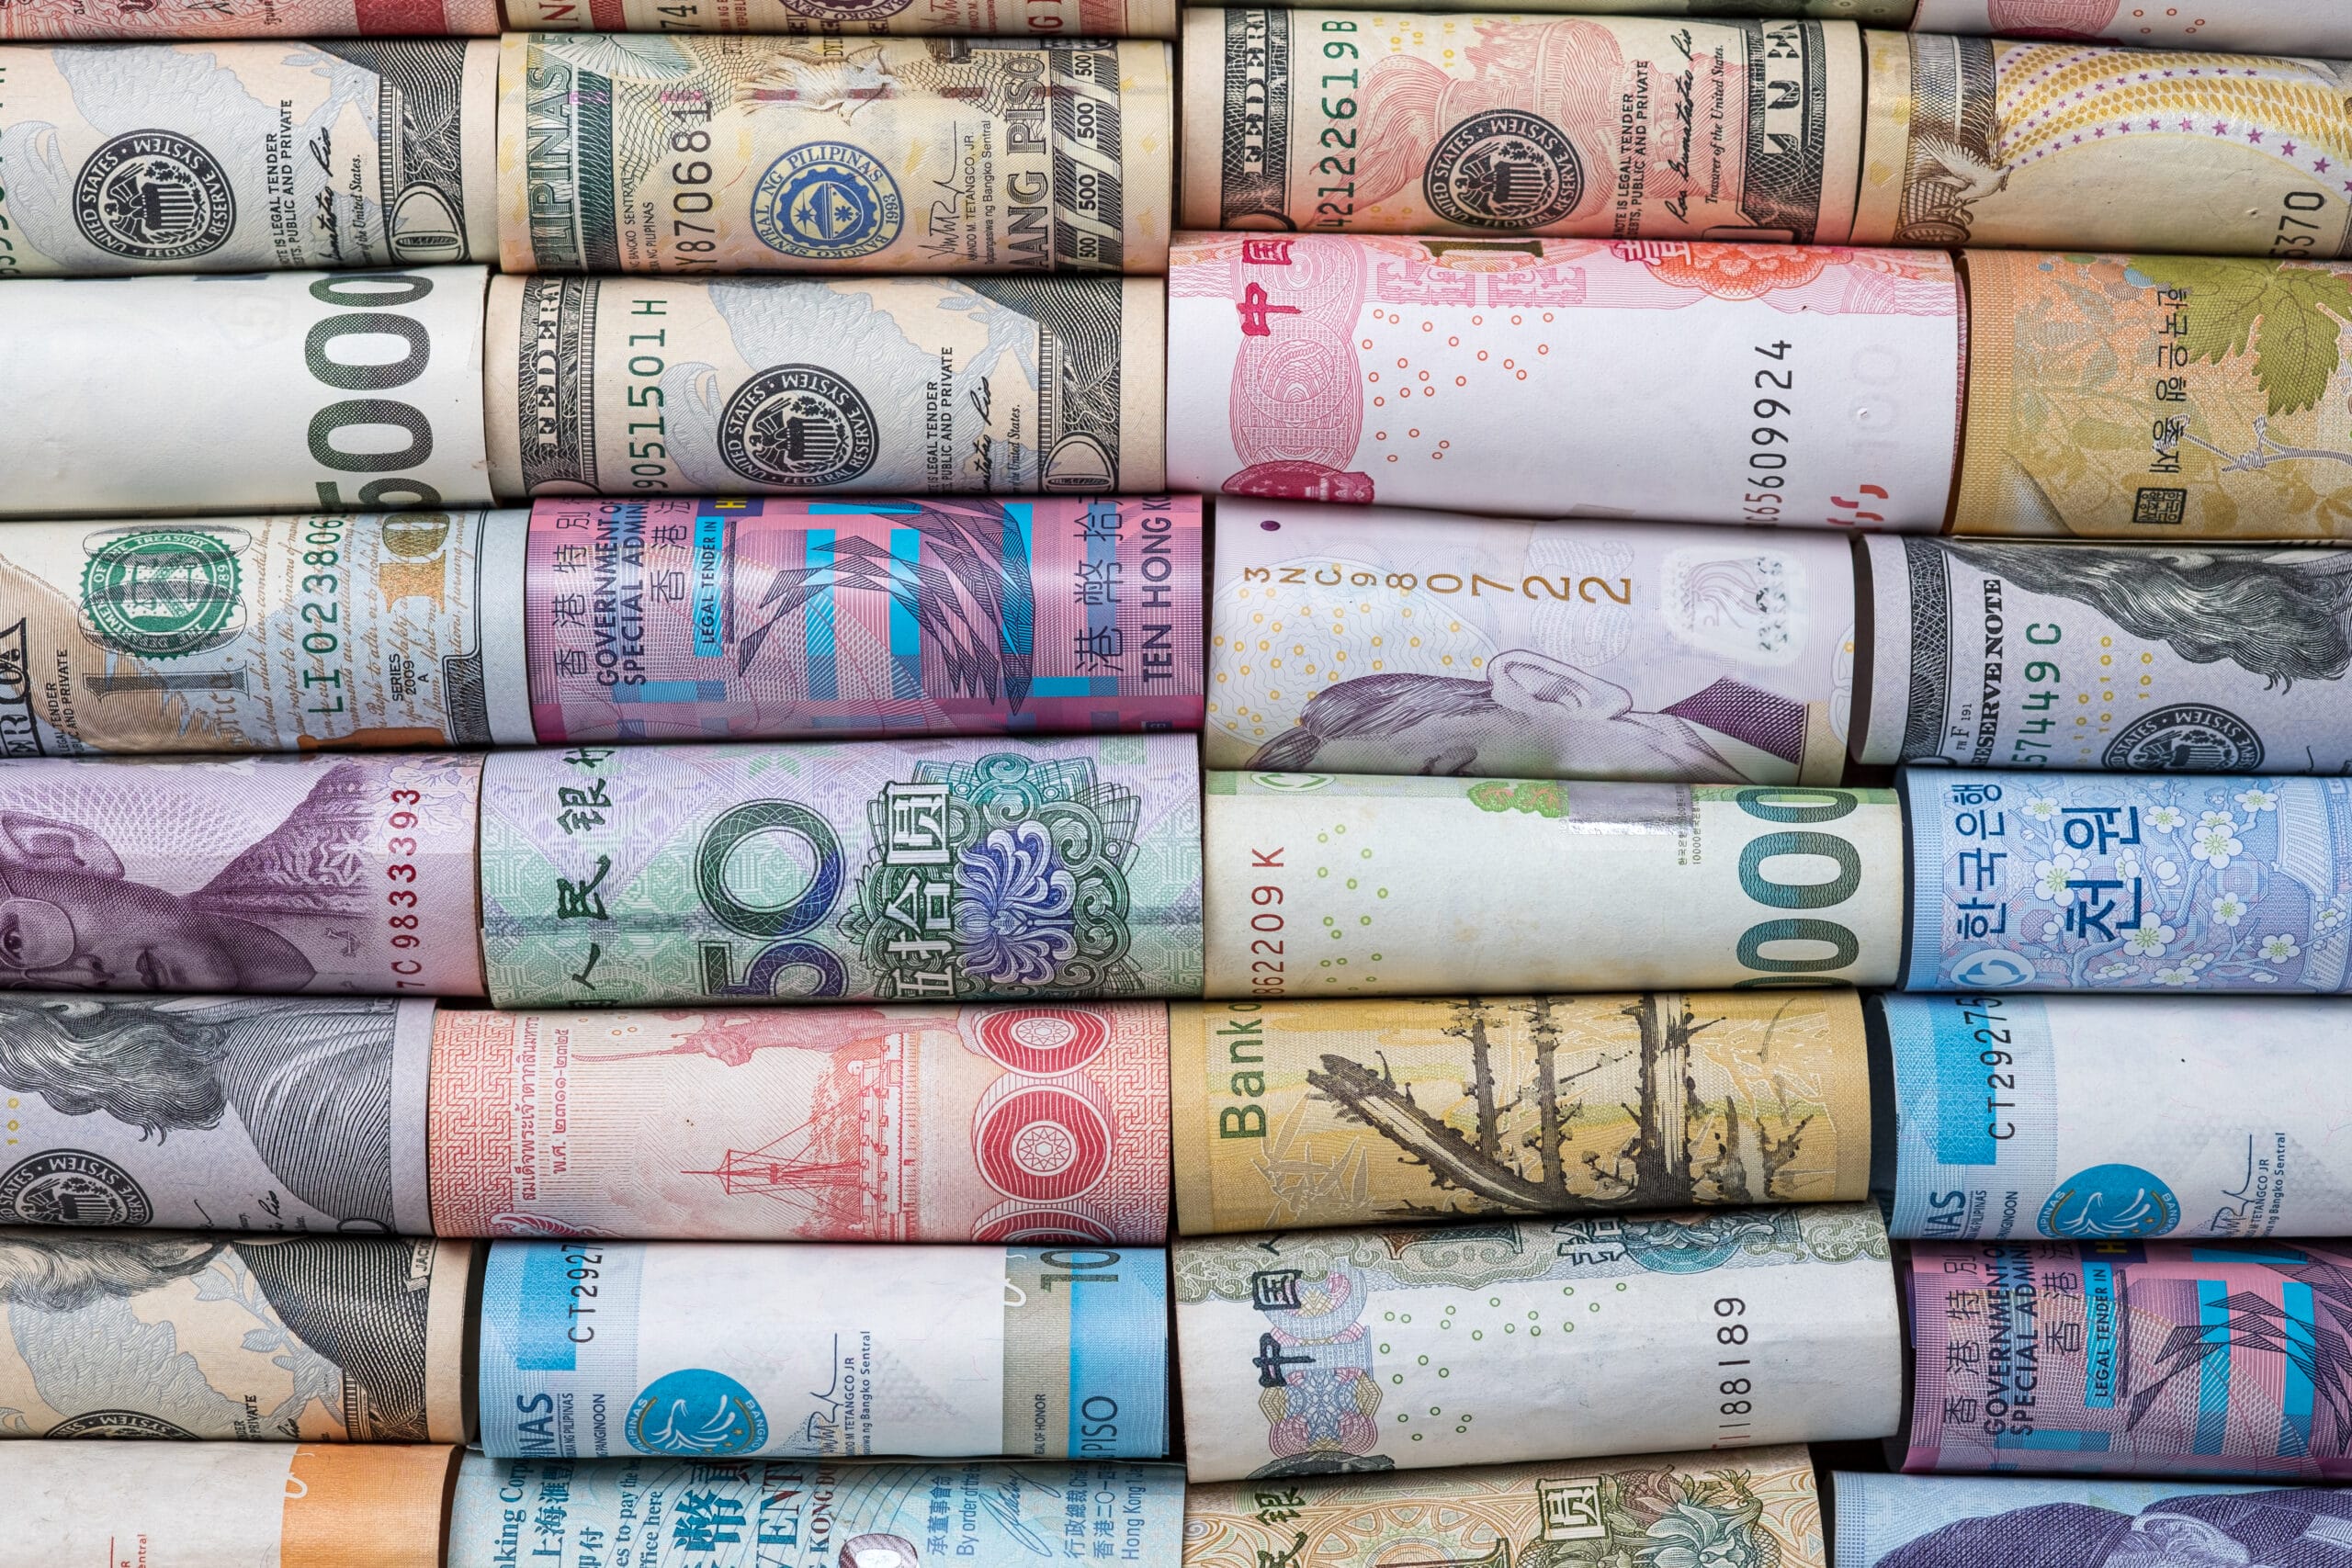 Closeup rolled of variety banknote and multi currency around the world. Exchange rate and Forex investment concept.-Image.